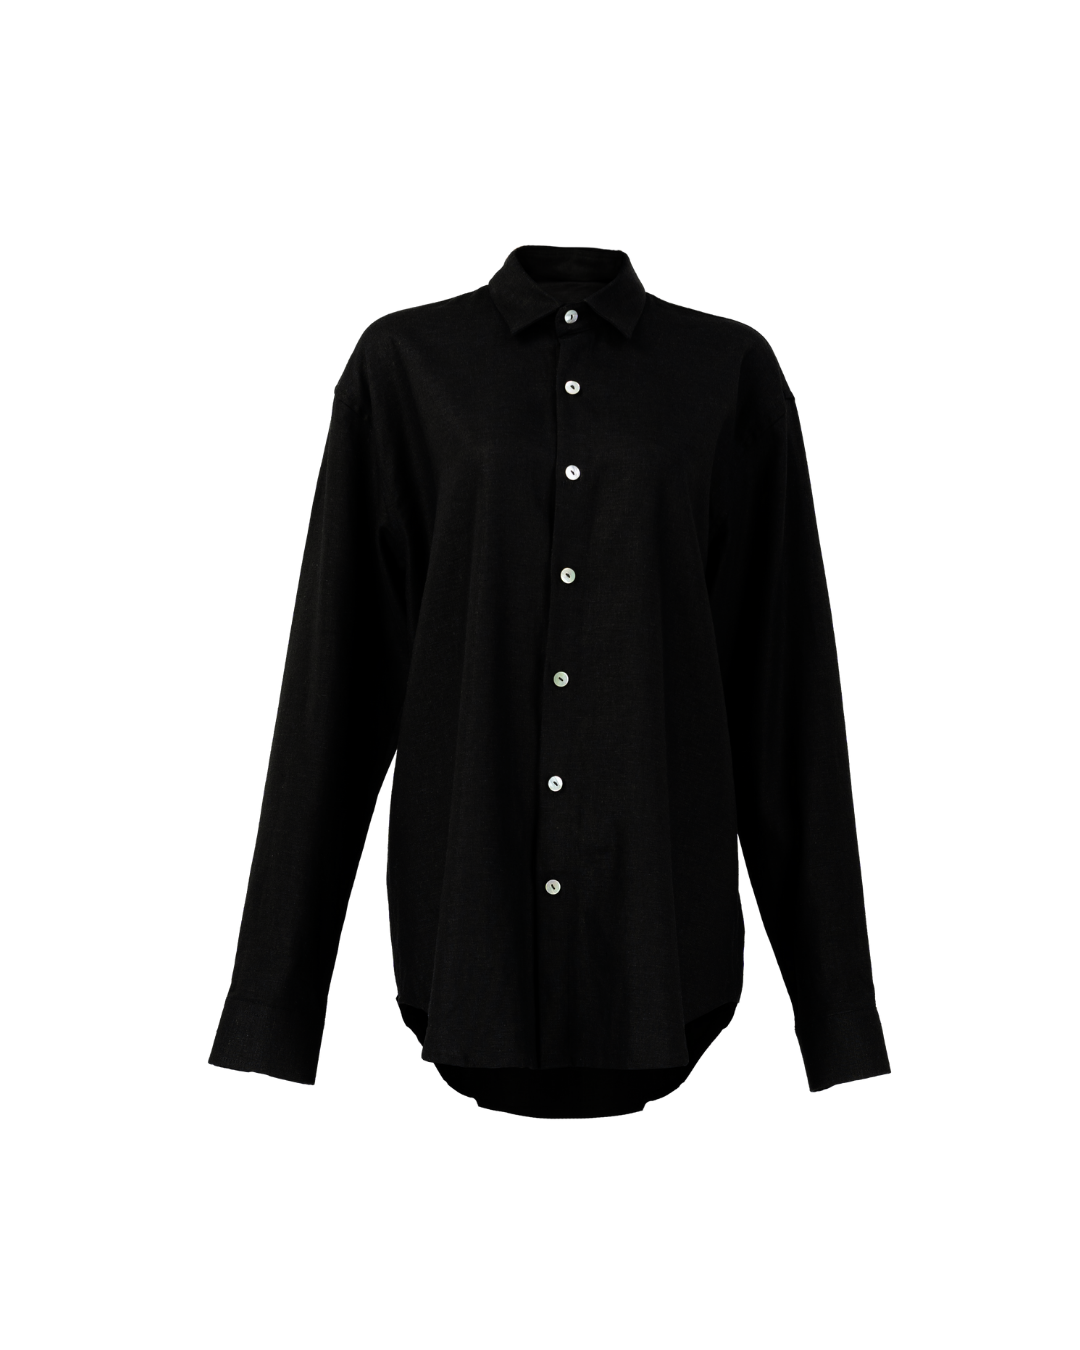 Oversized Button Down in Black